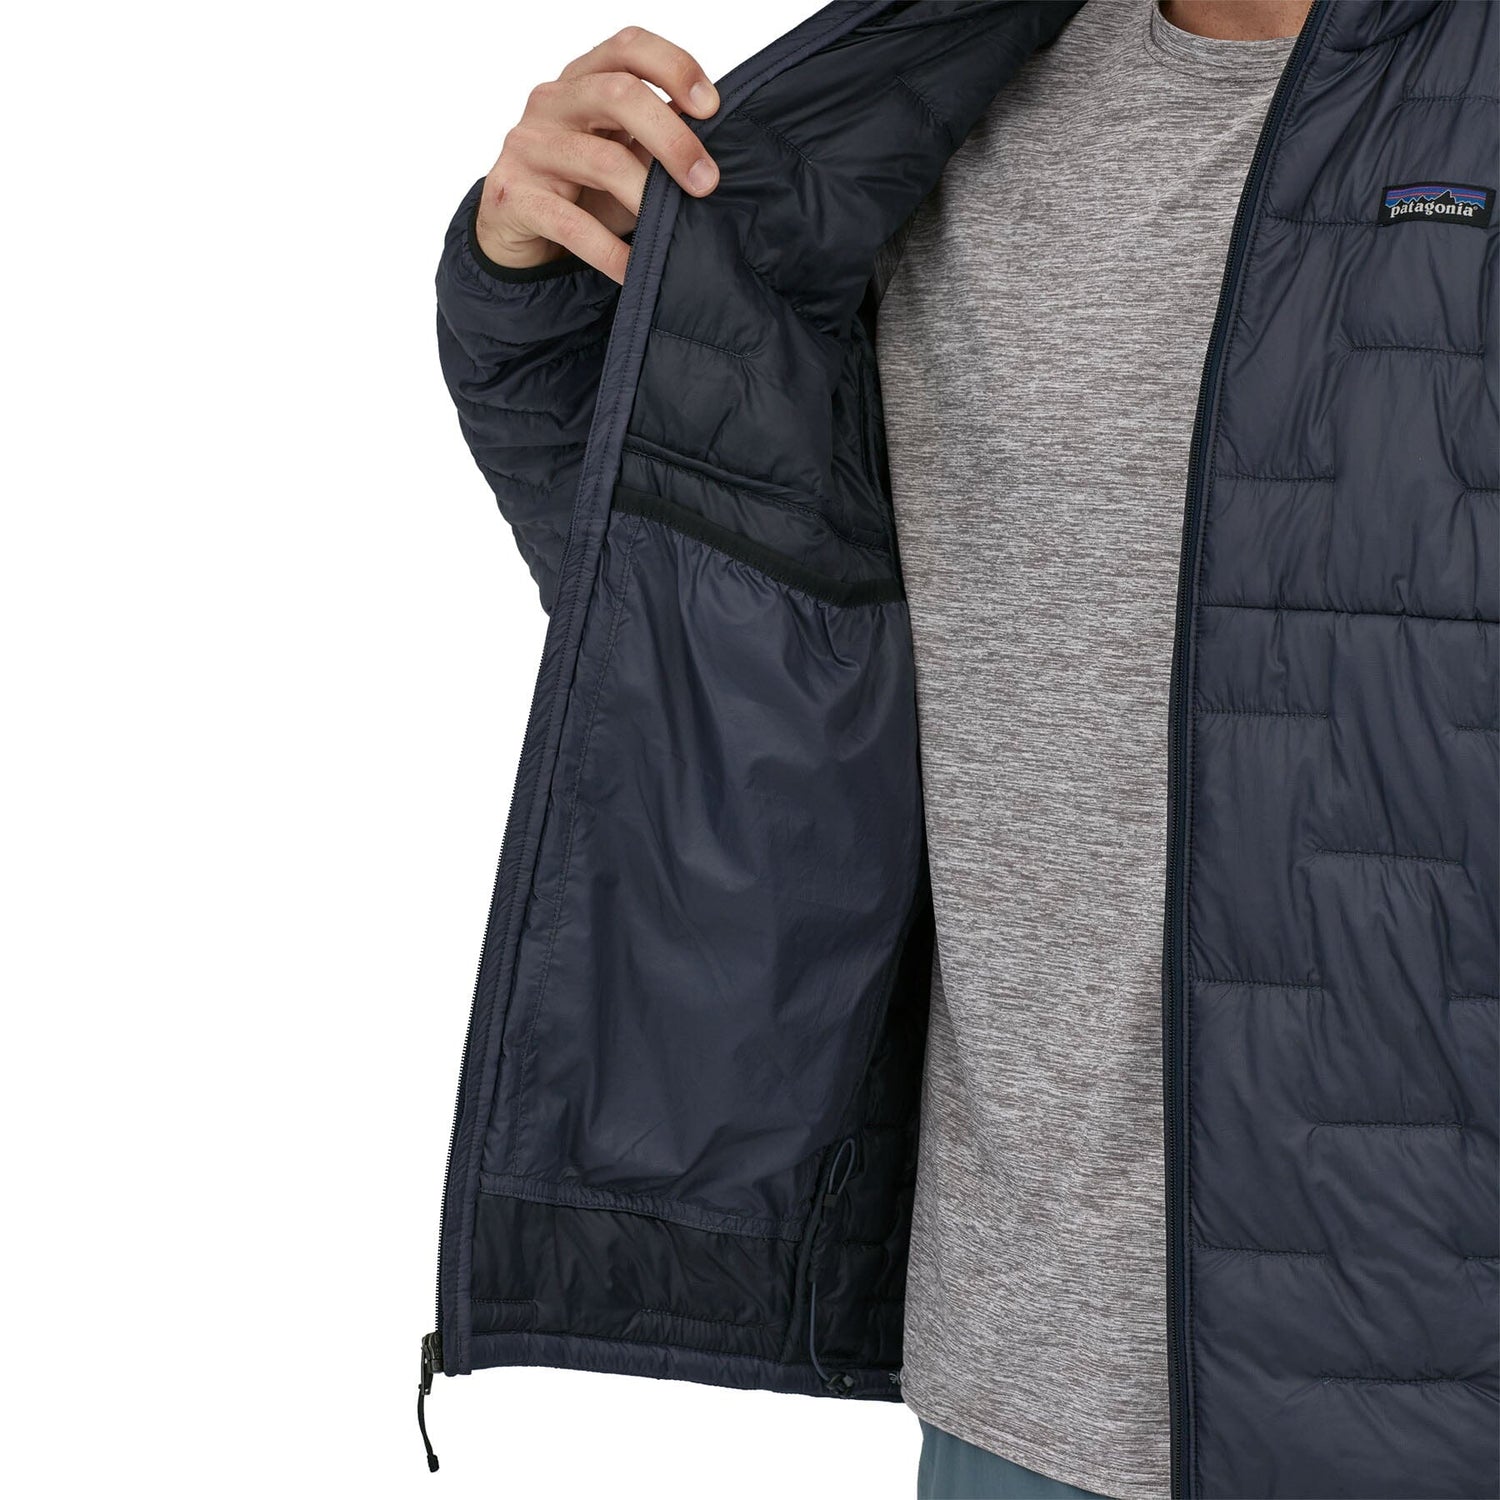 Patagonia M's Micro Puff Hoody - Recycled Nylon & Recycled Polyester Smolder Blue Jacket